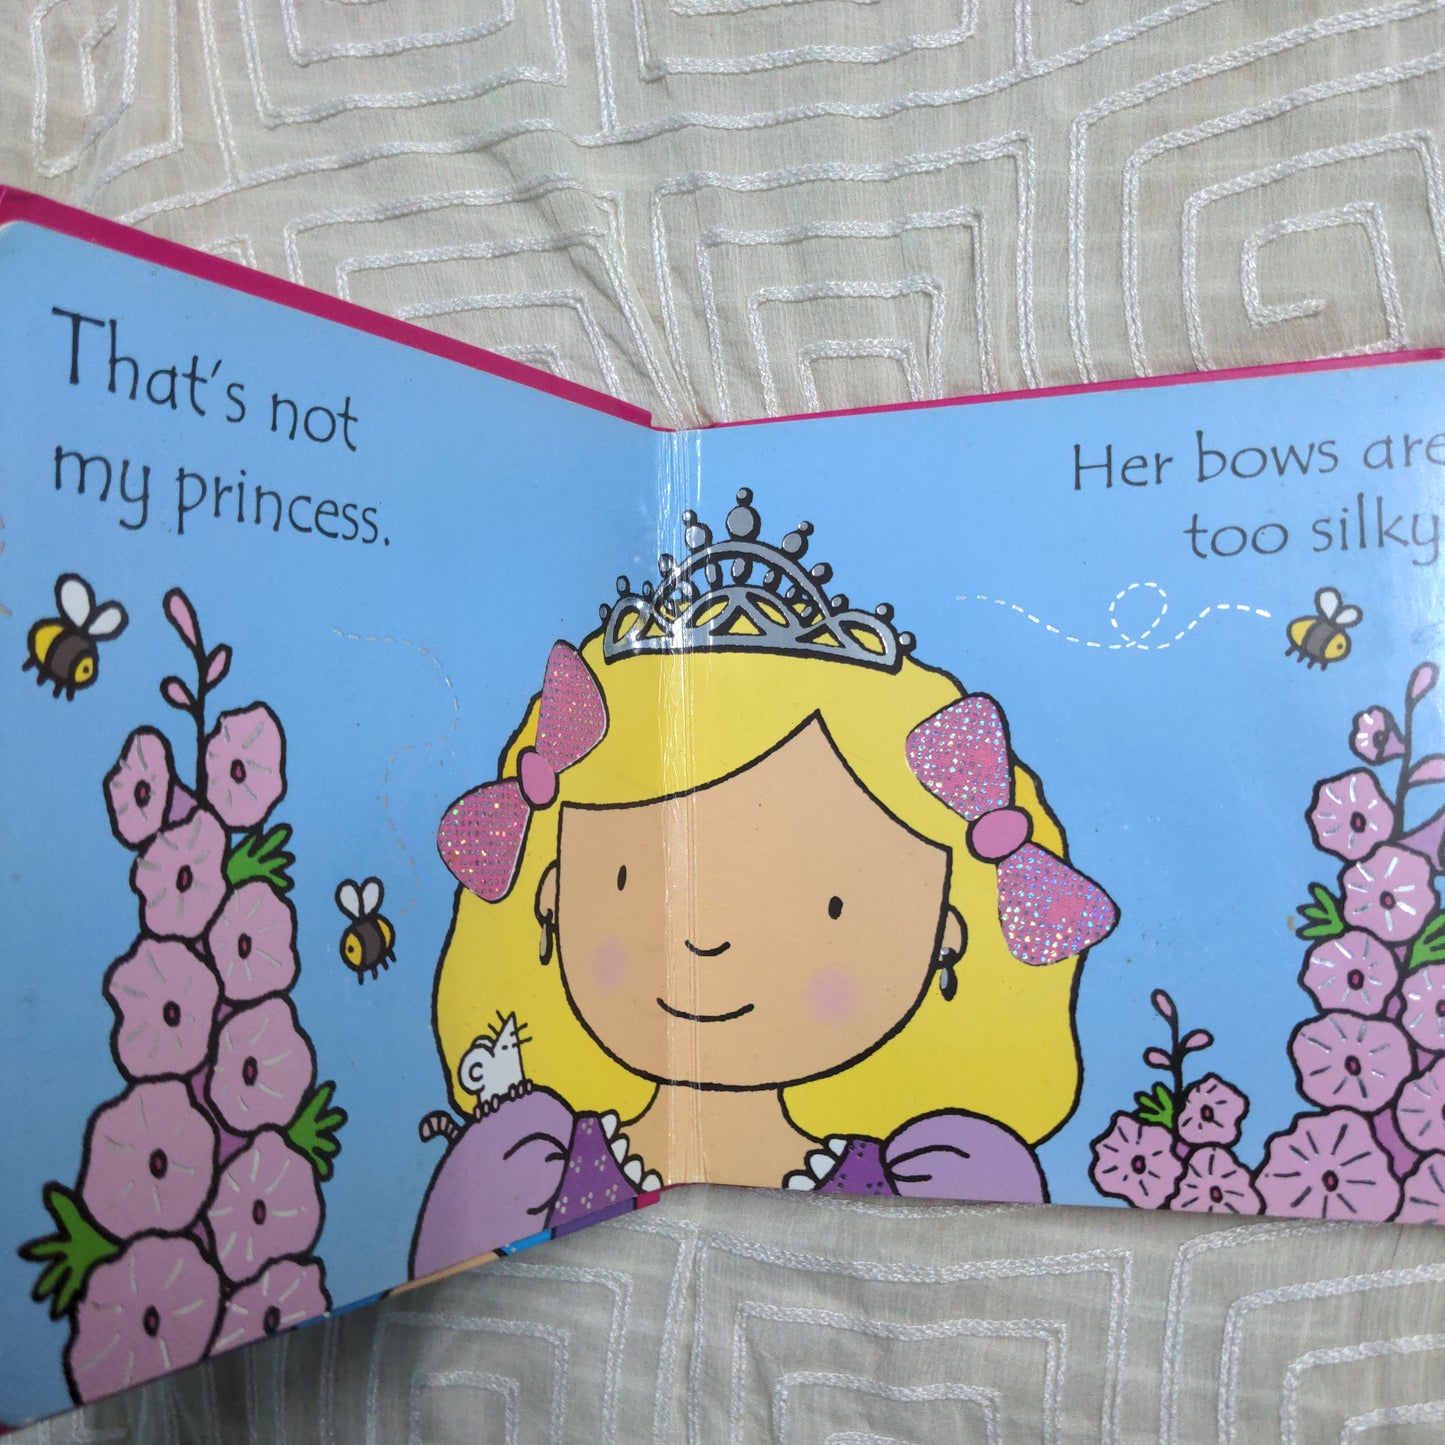 That's not my Princess - Excellent Condition